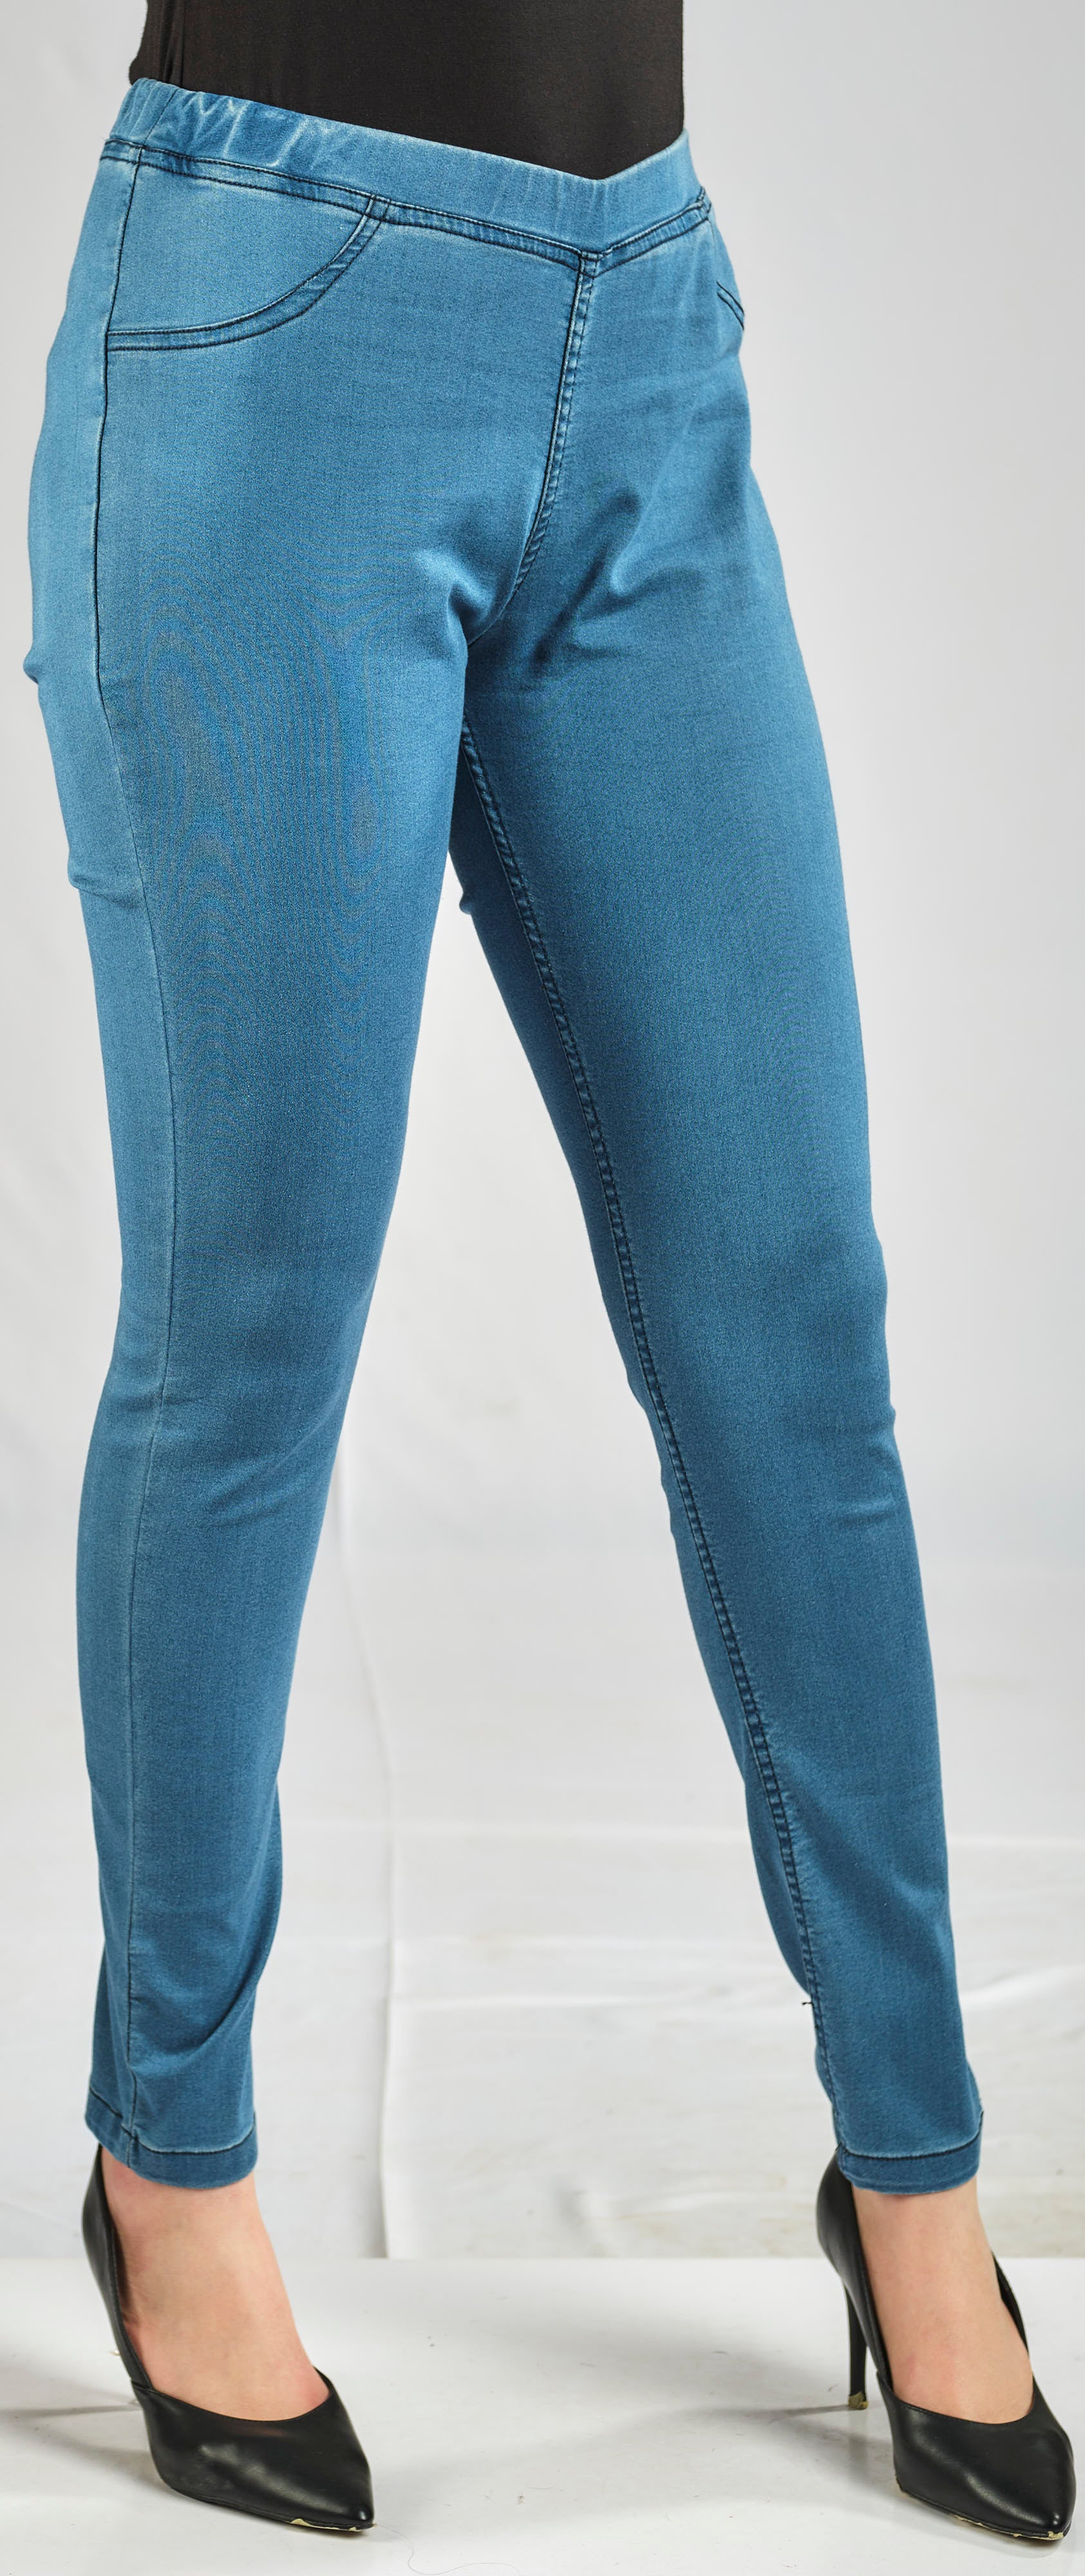 BASIC JEANS LEGGINGS MADE FROM FINE COTTON AND ELASTIN WITH AN